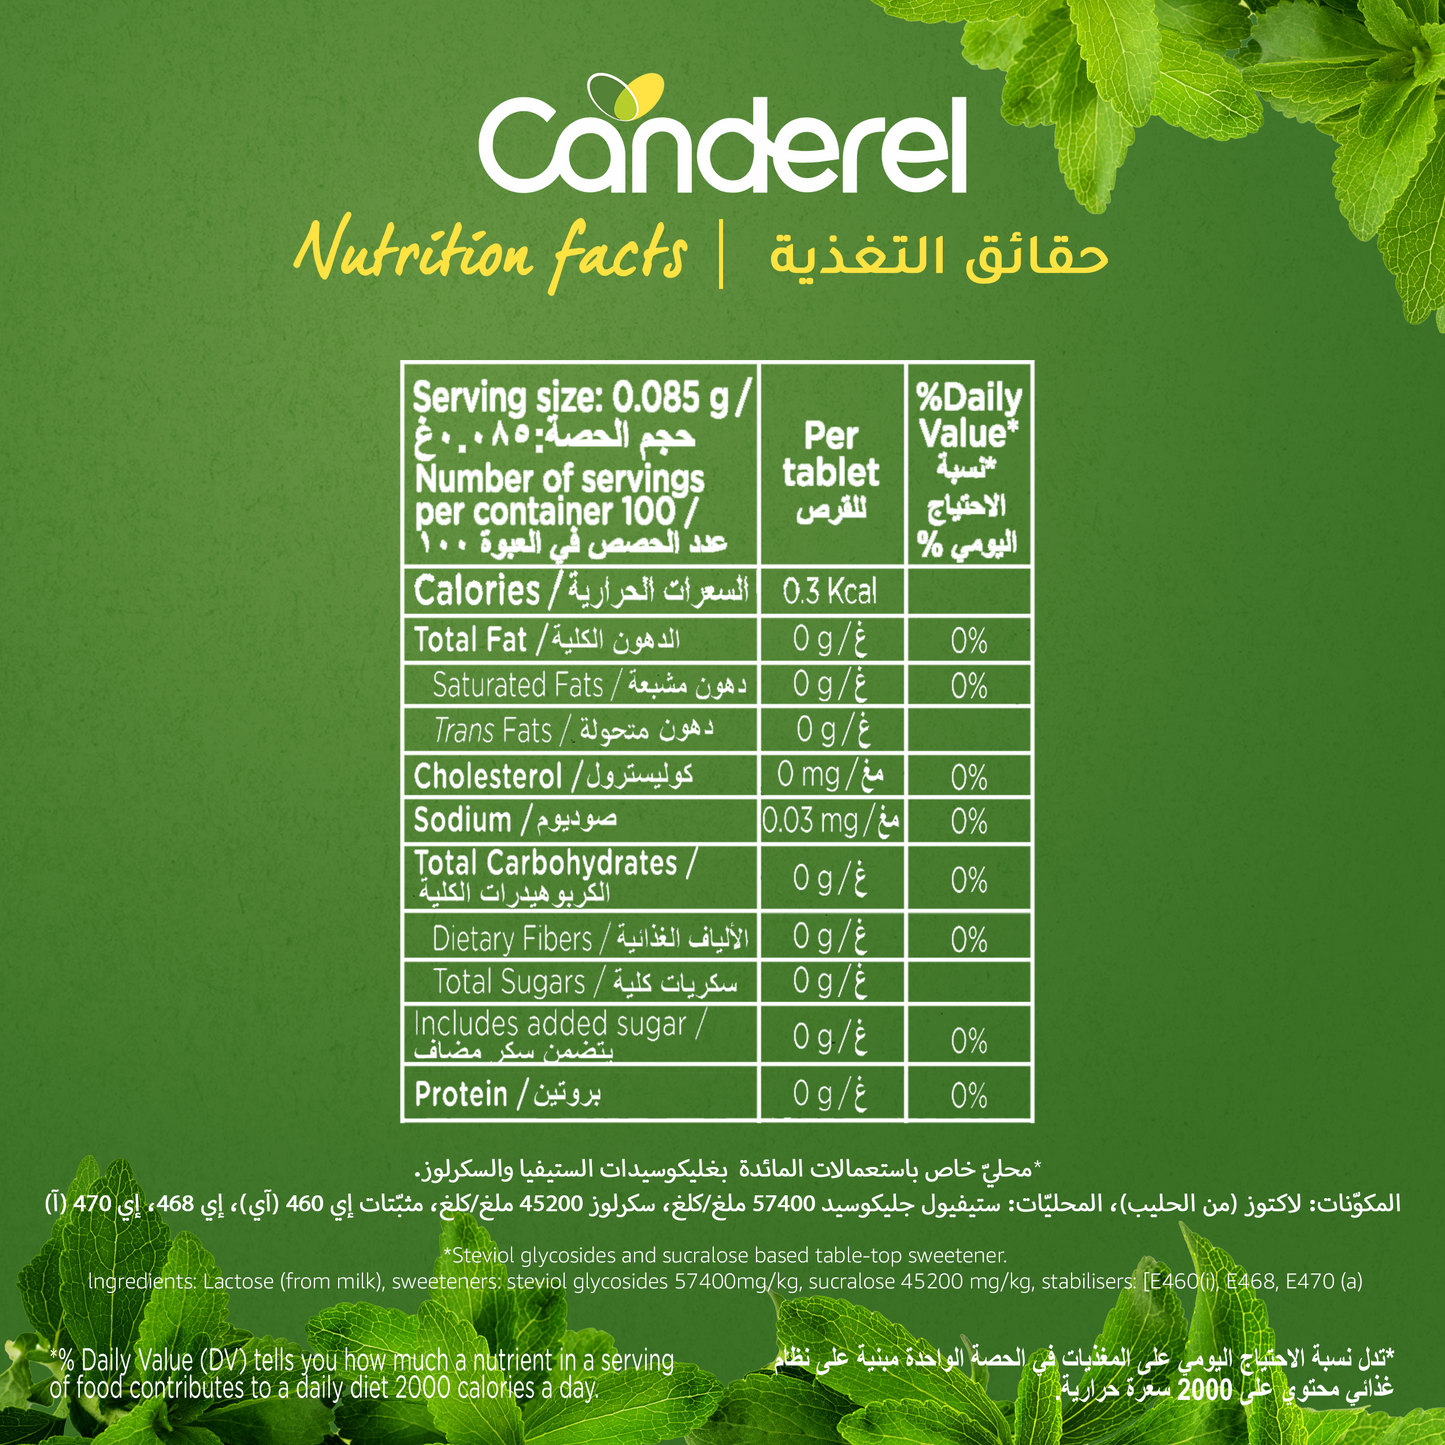 Canderel With Stevia 100 Tabs - 8.5g